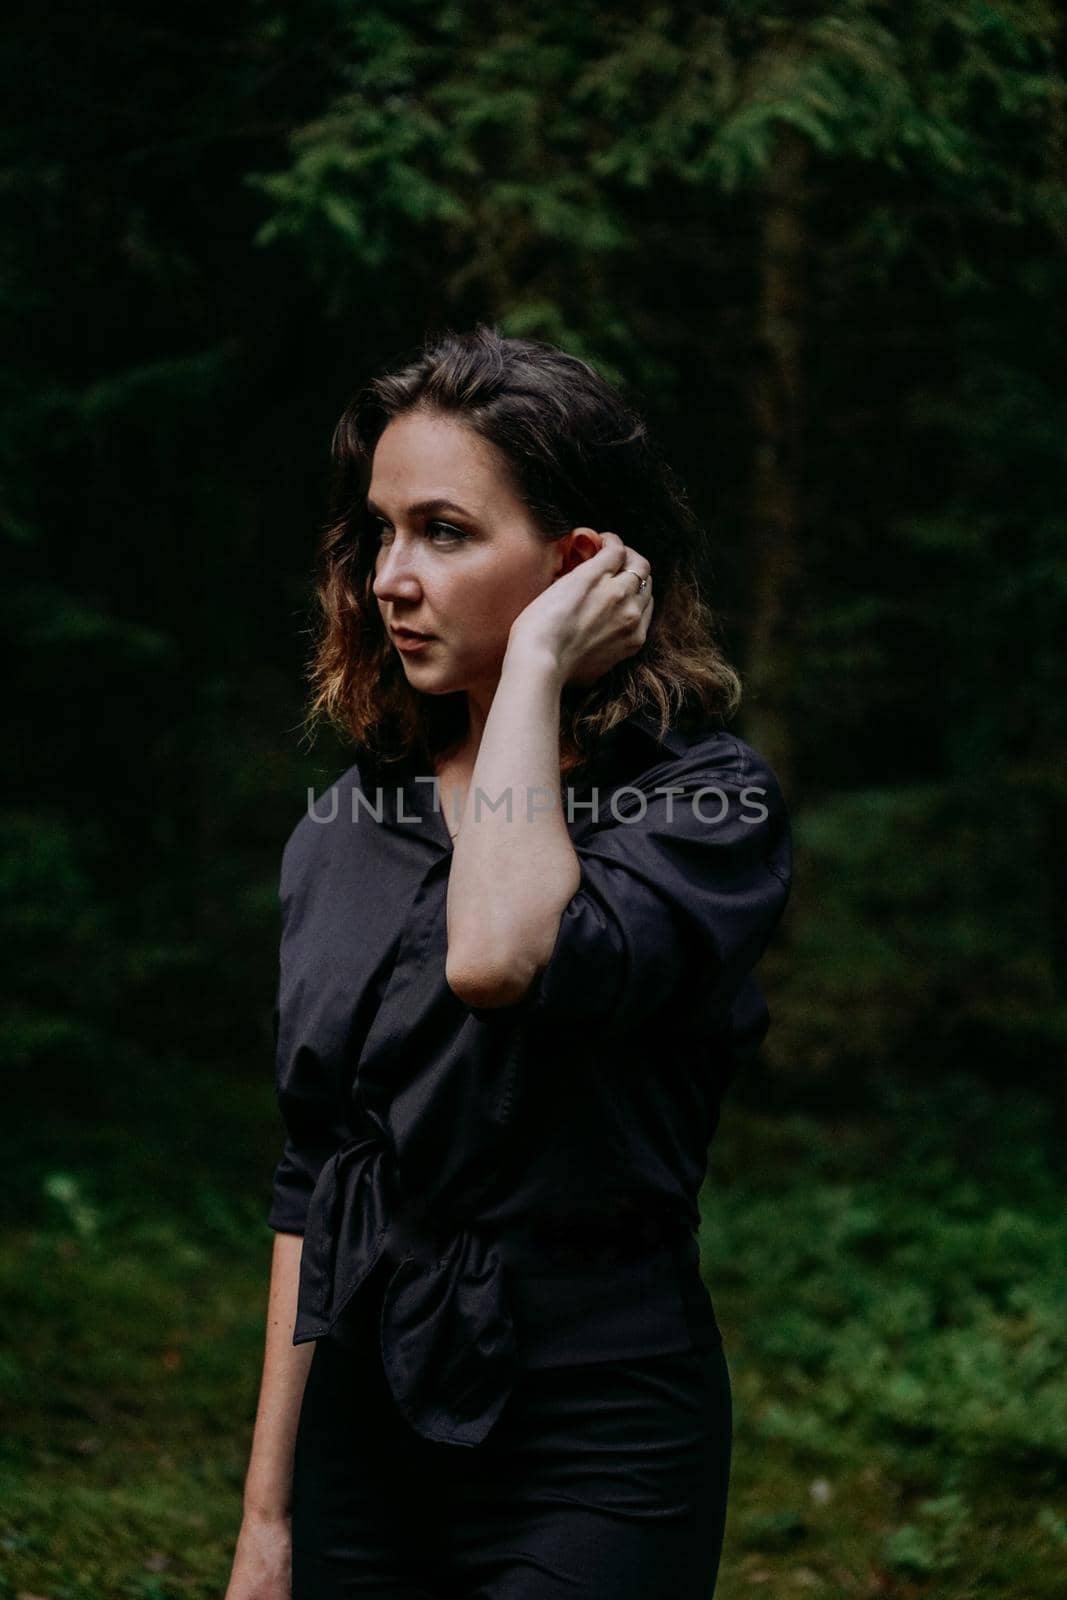 Young woman - close portrait in a dark pine forest. Woman in black shirt